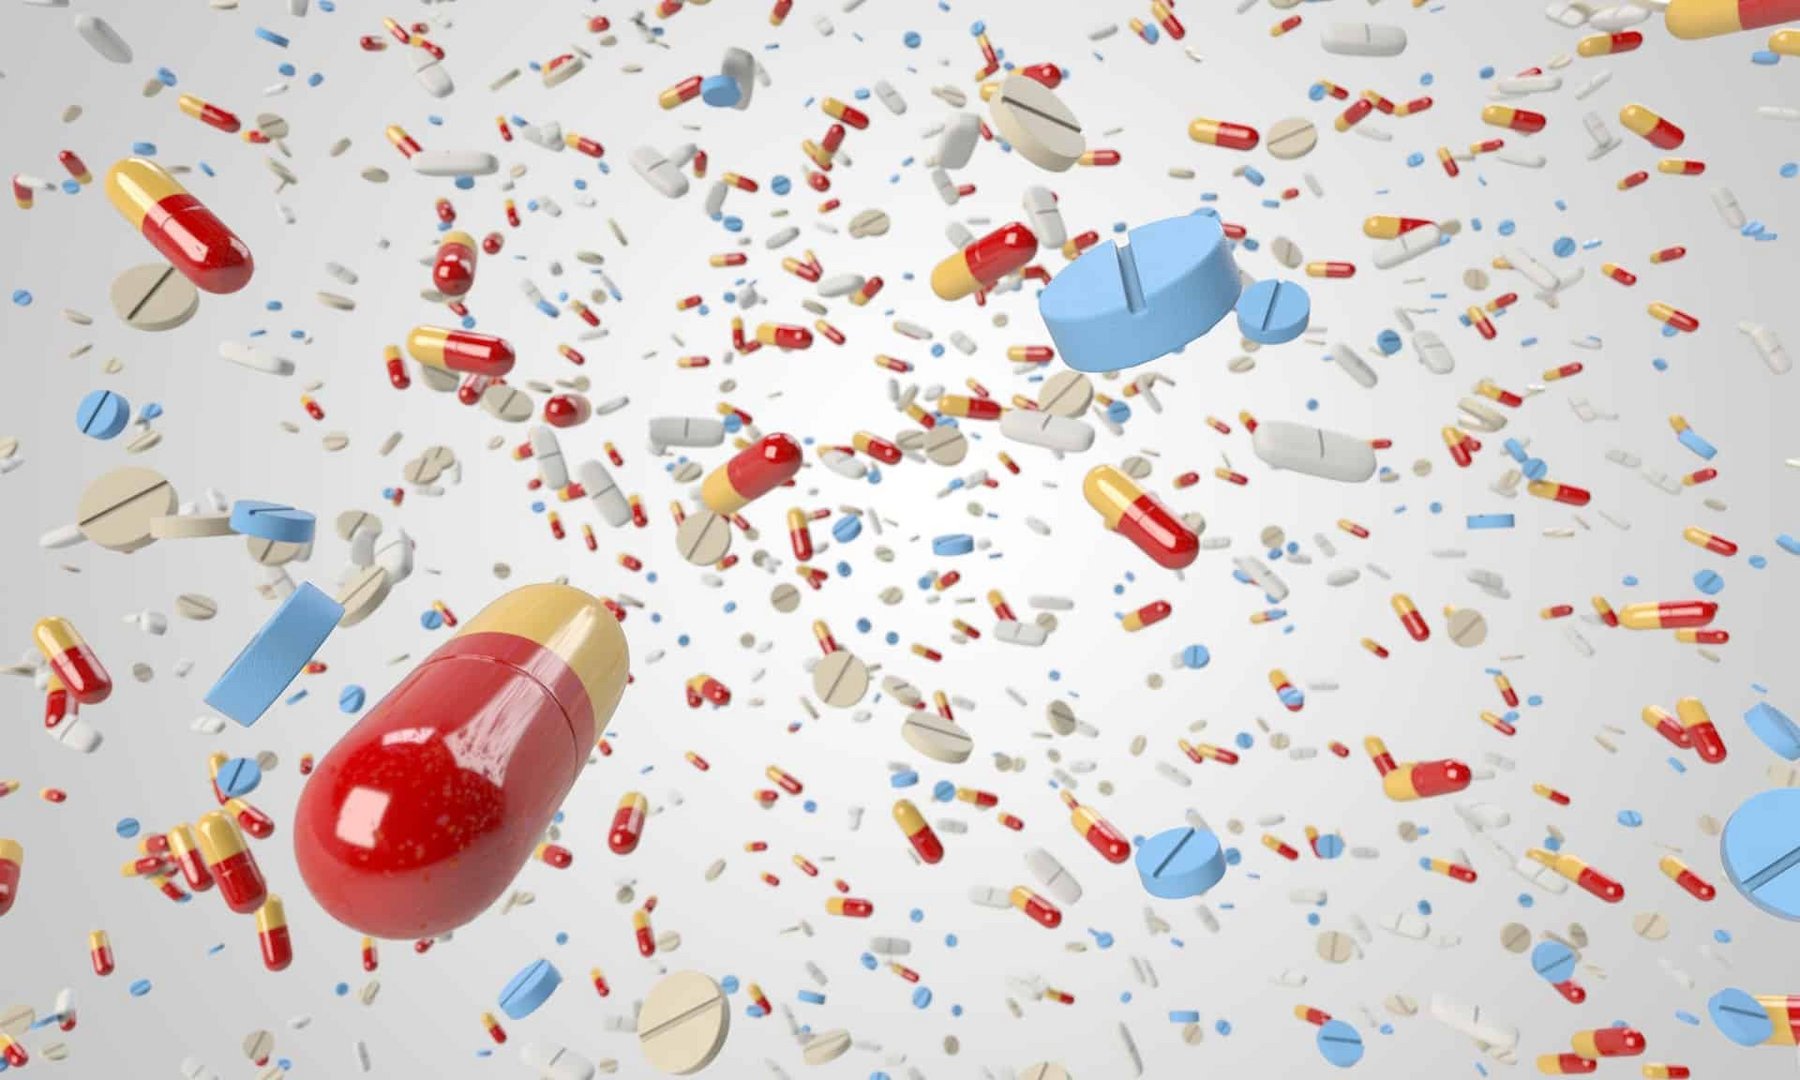 image Overuse, misuse of antibiotics has helped microbes to become resistant to many treatments